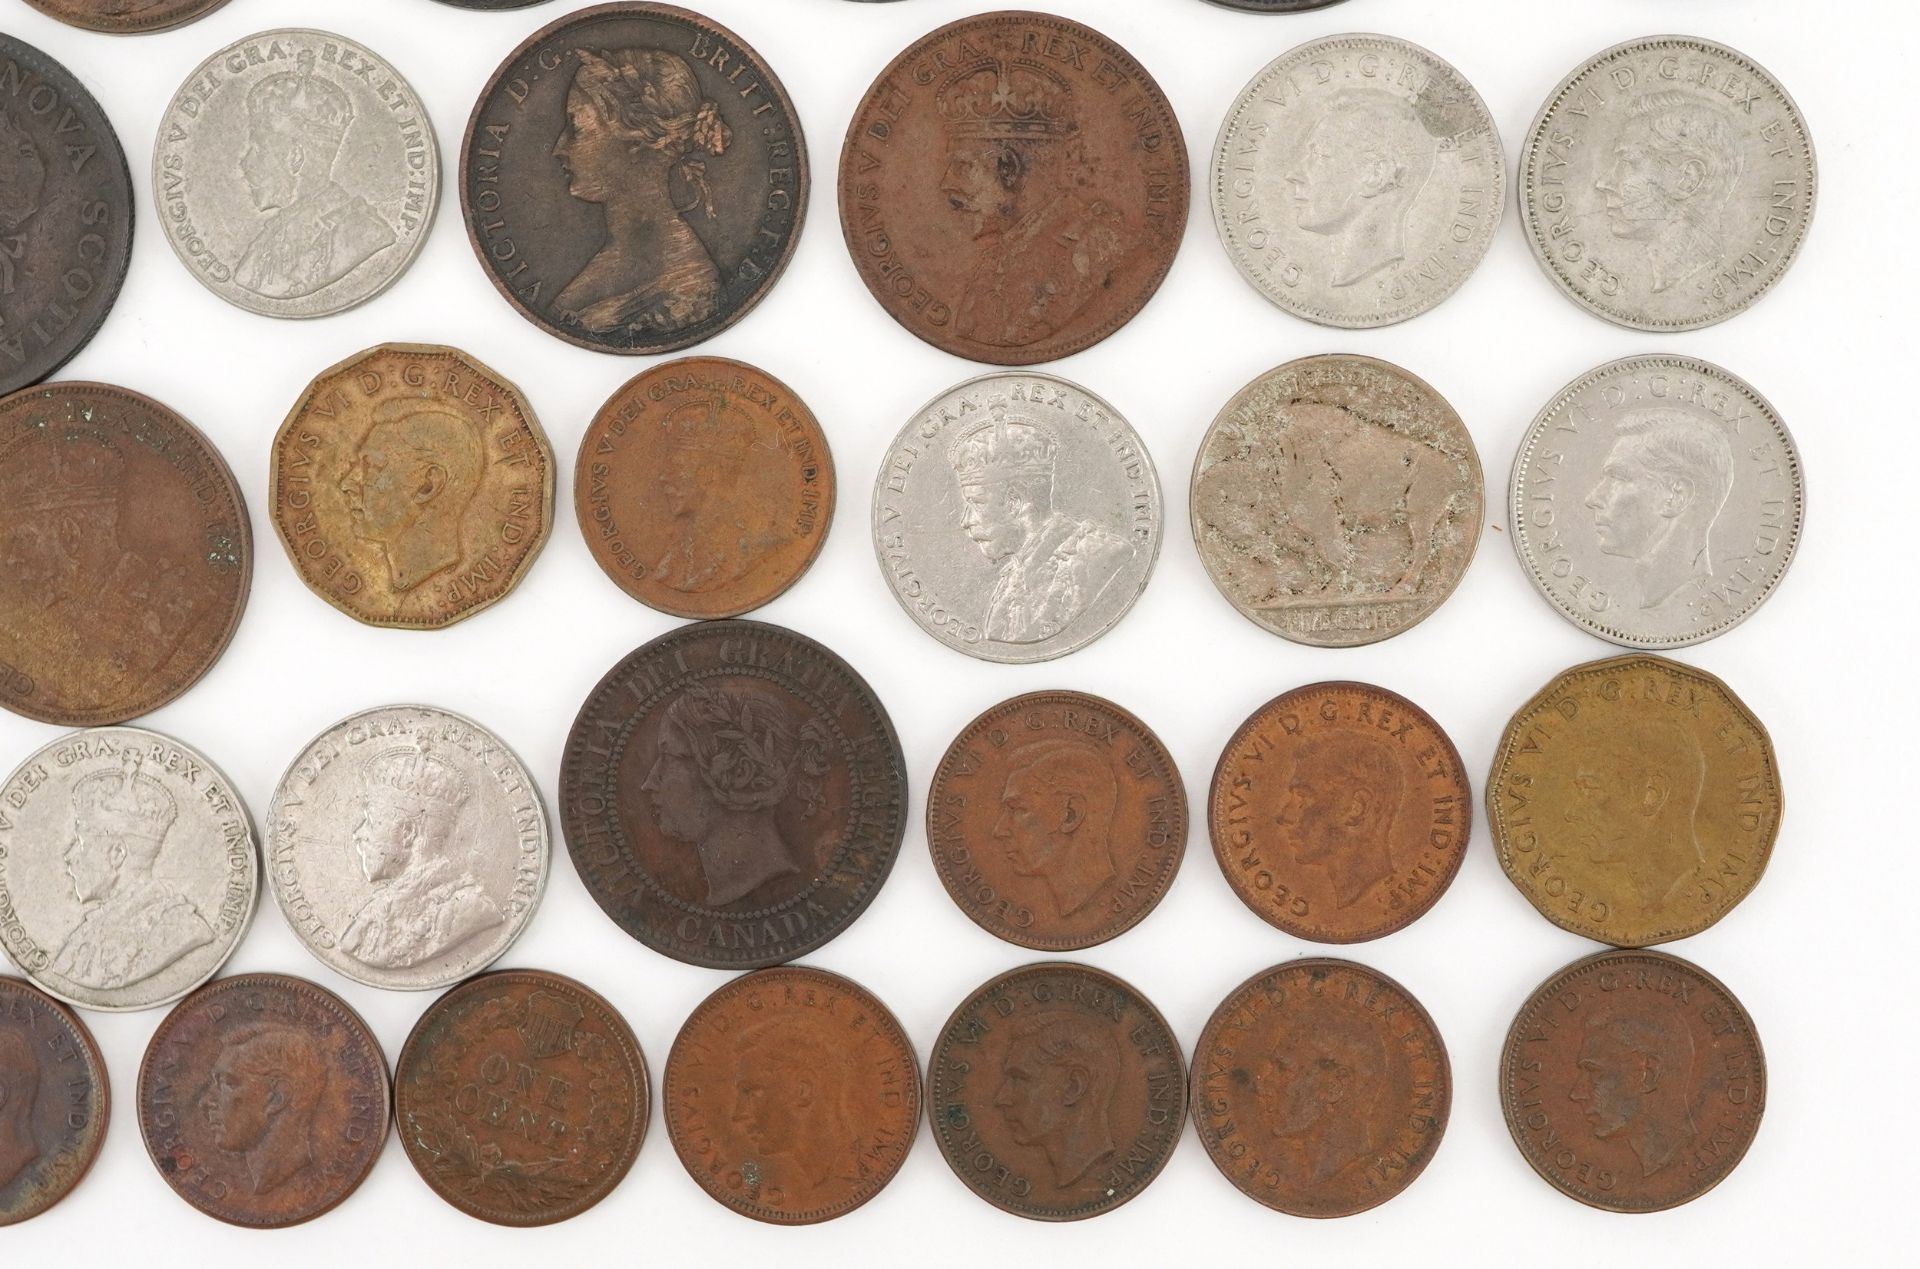 Early 19th century and later Canadian coinage and tokens including Nova Scotia one penny tokens, - Image 20 of 20